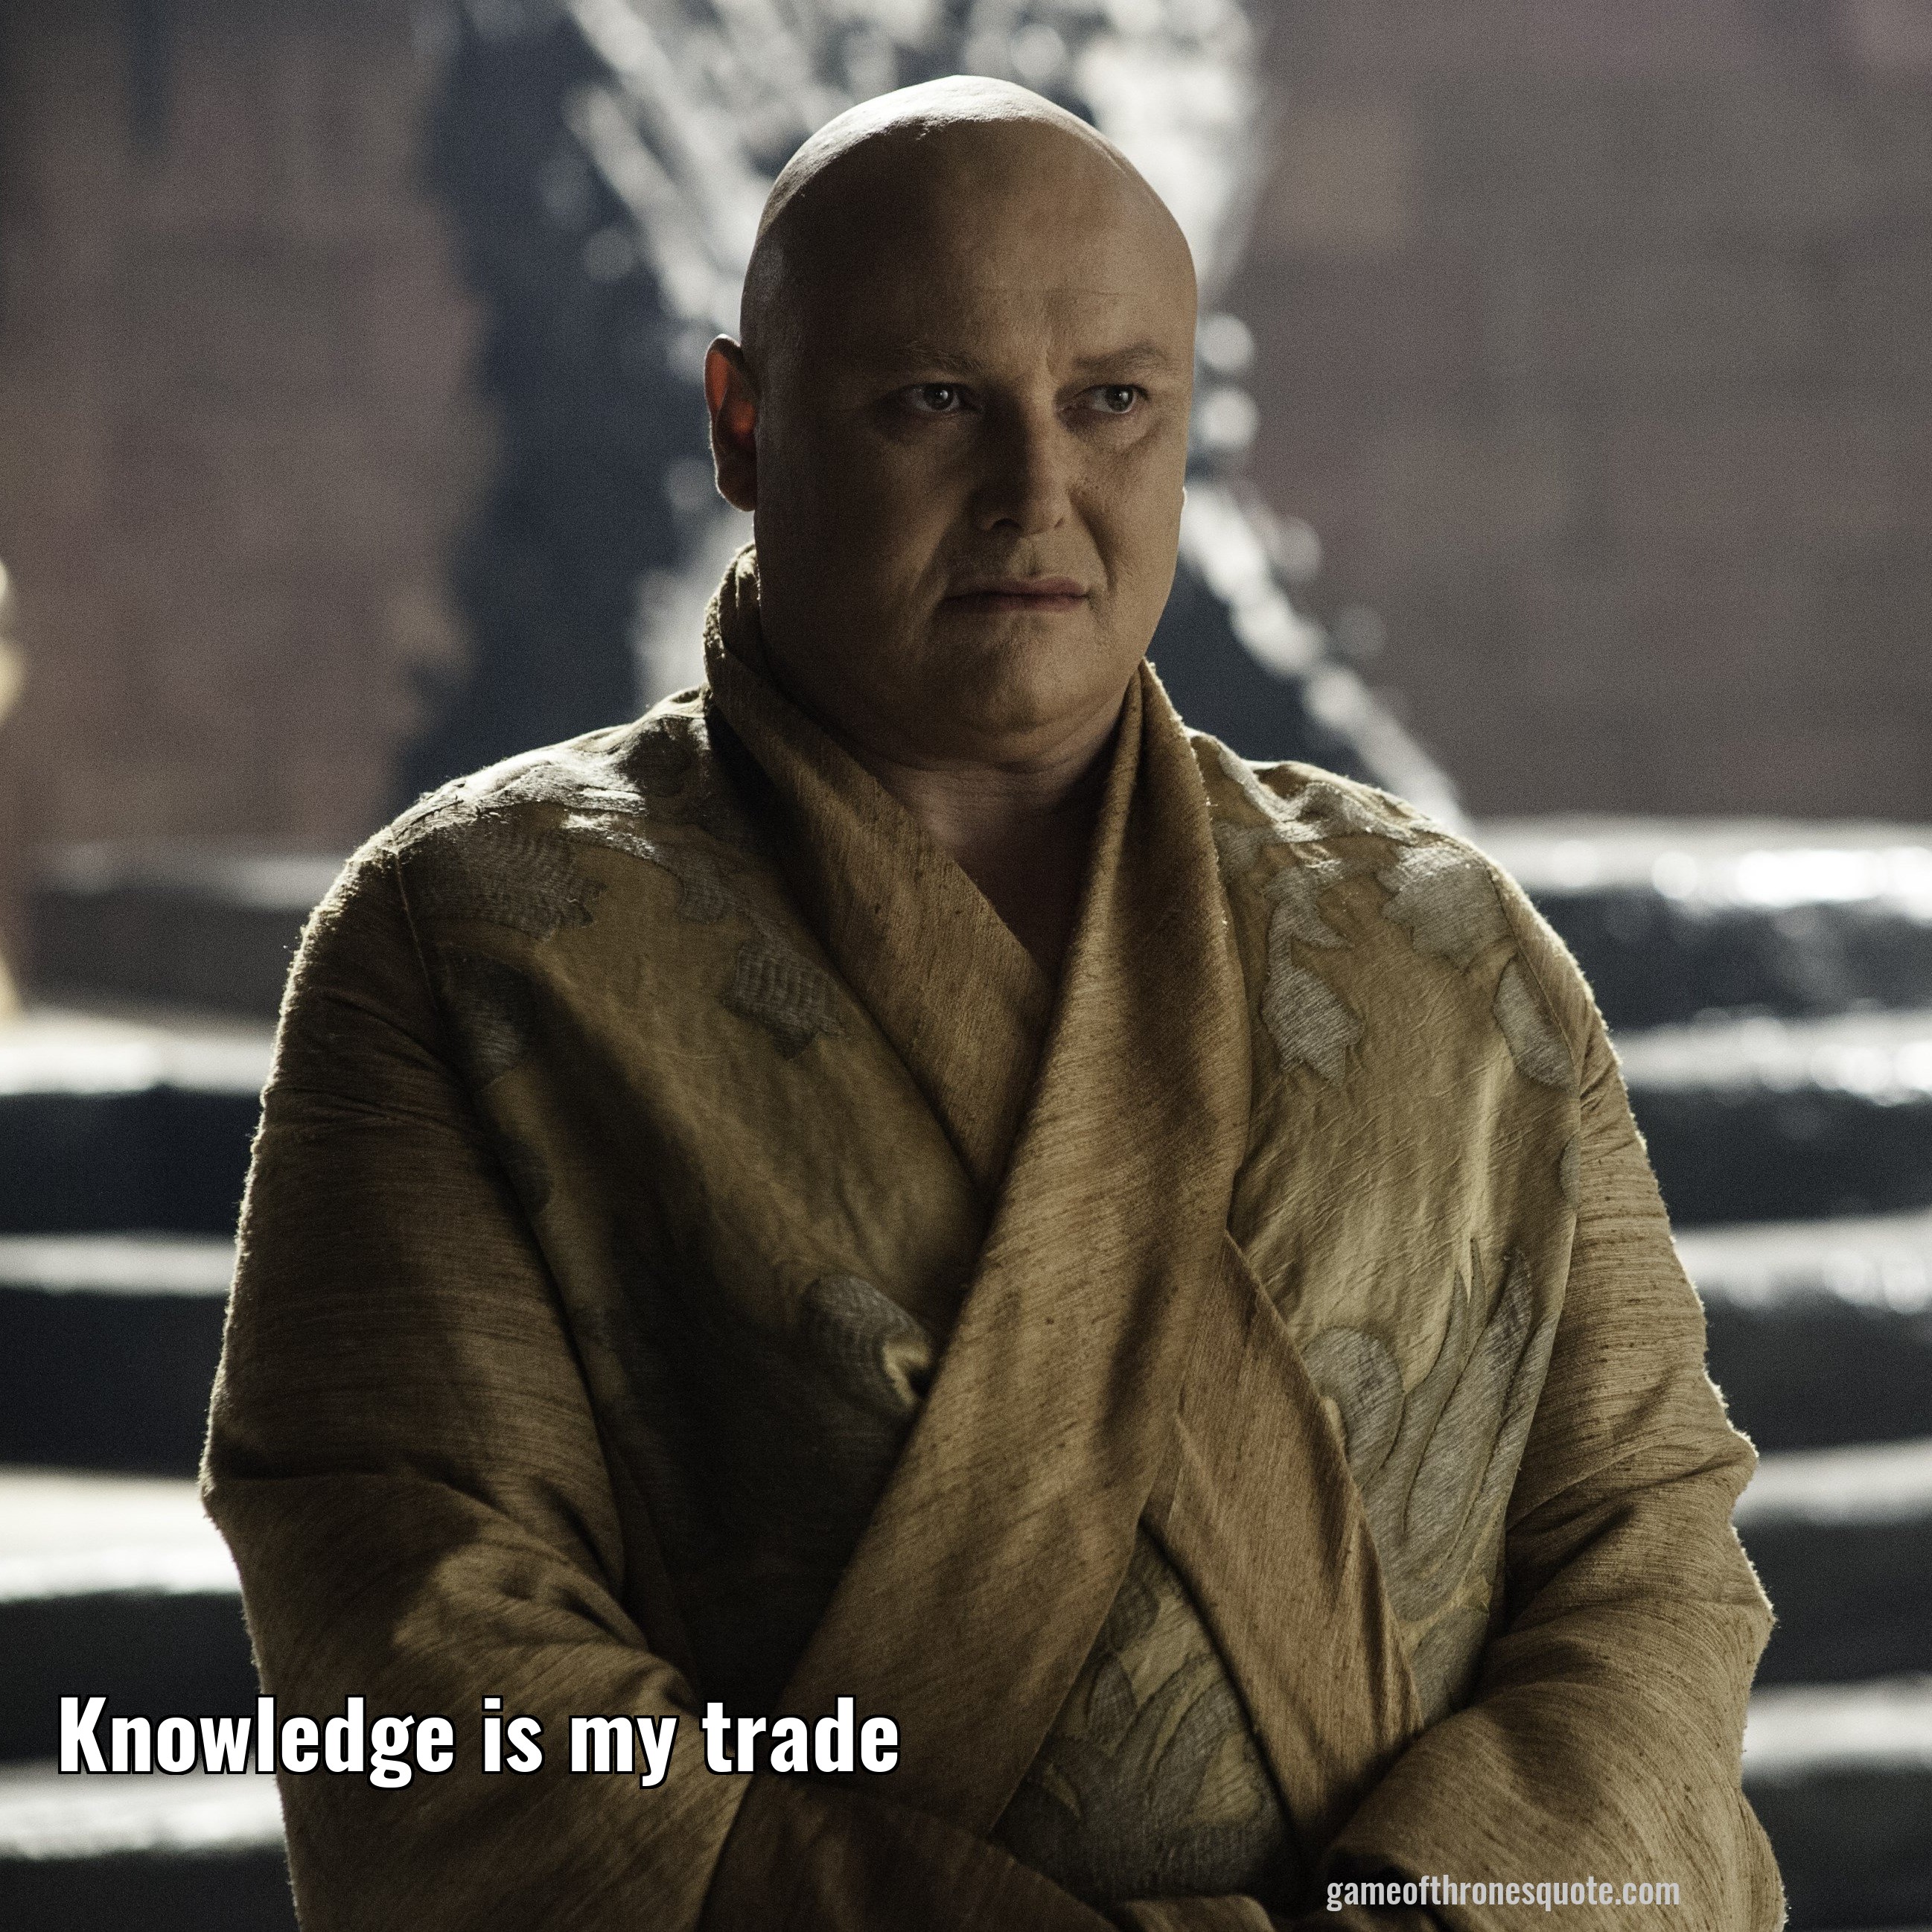 Knowledge is my trade